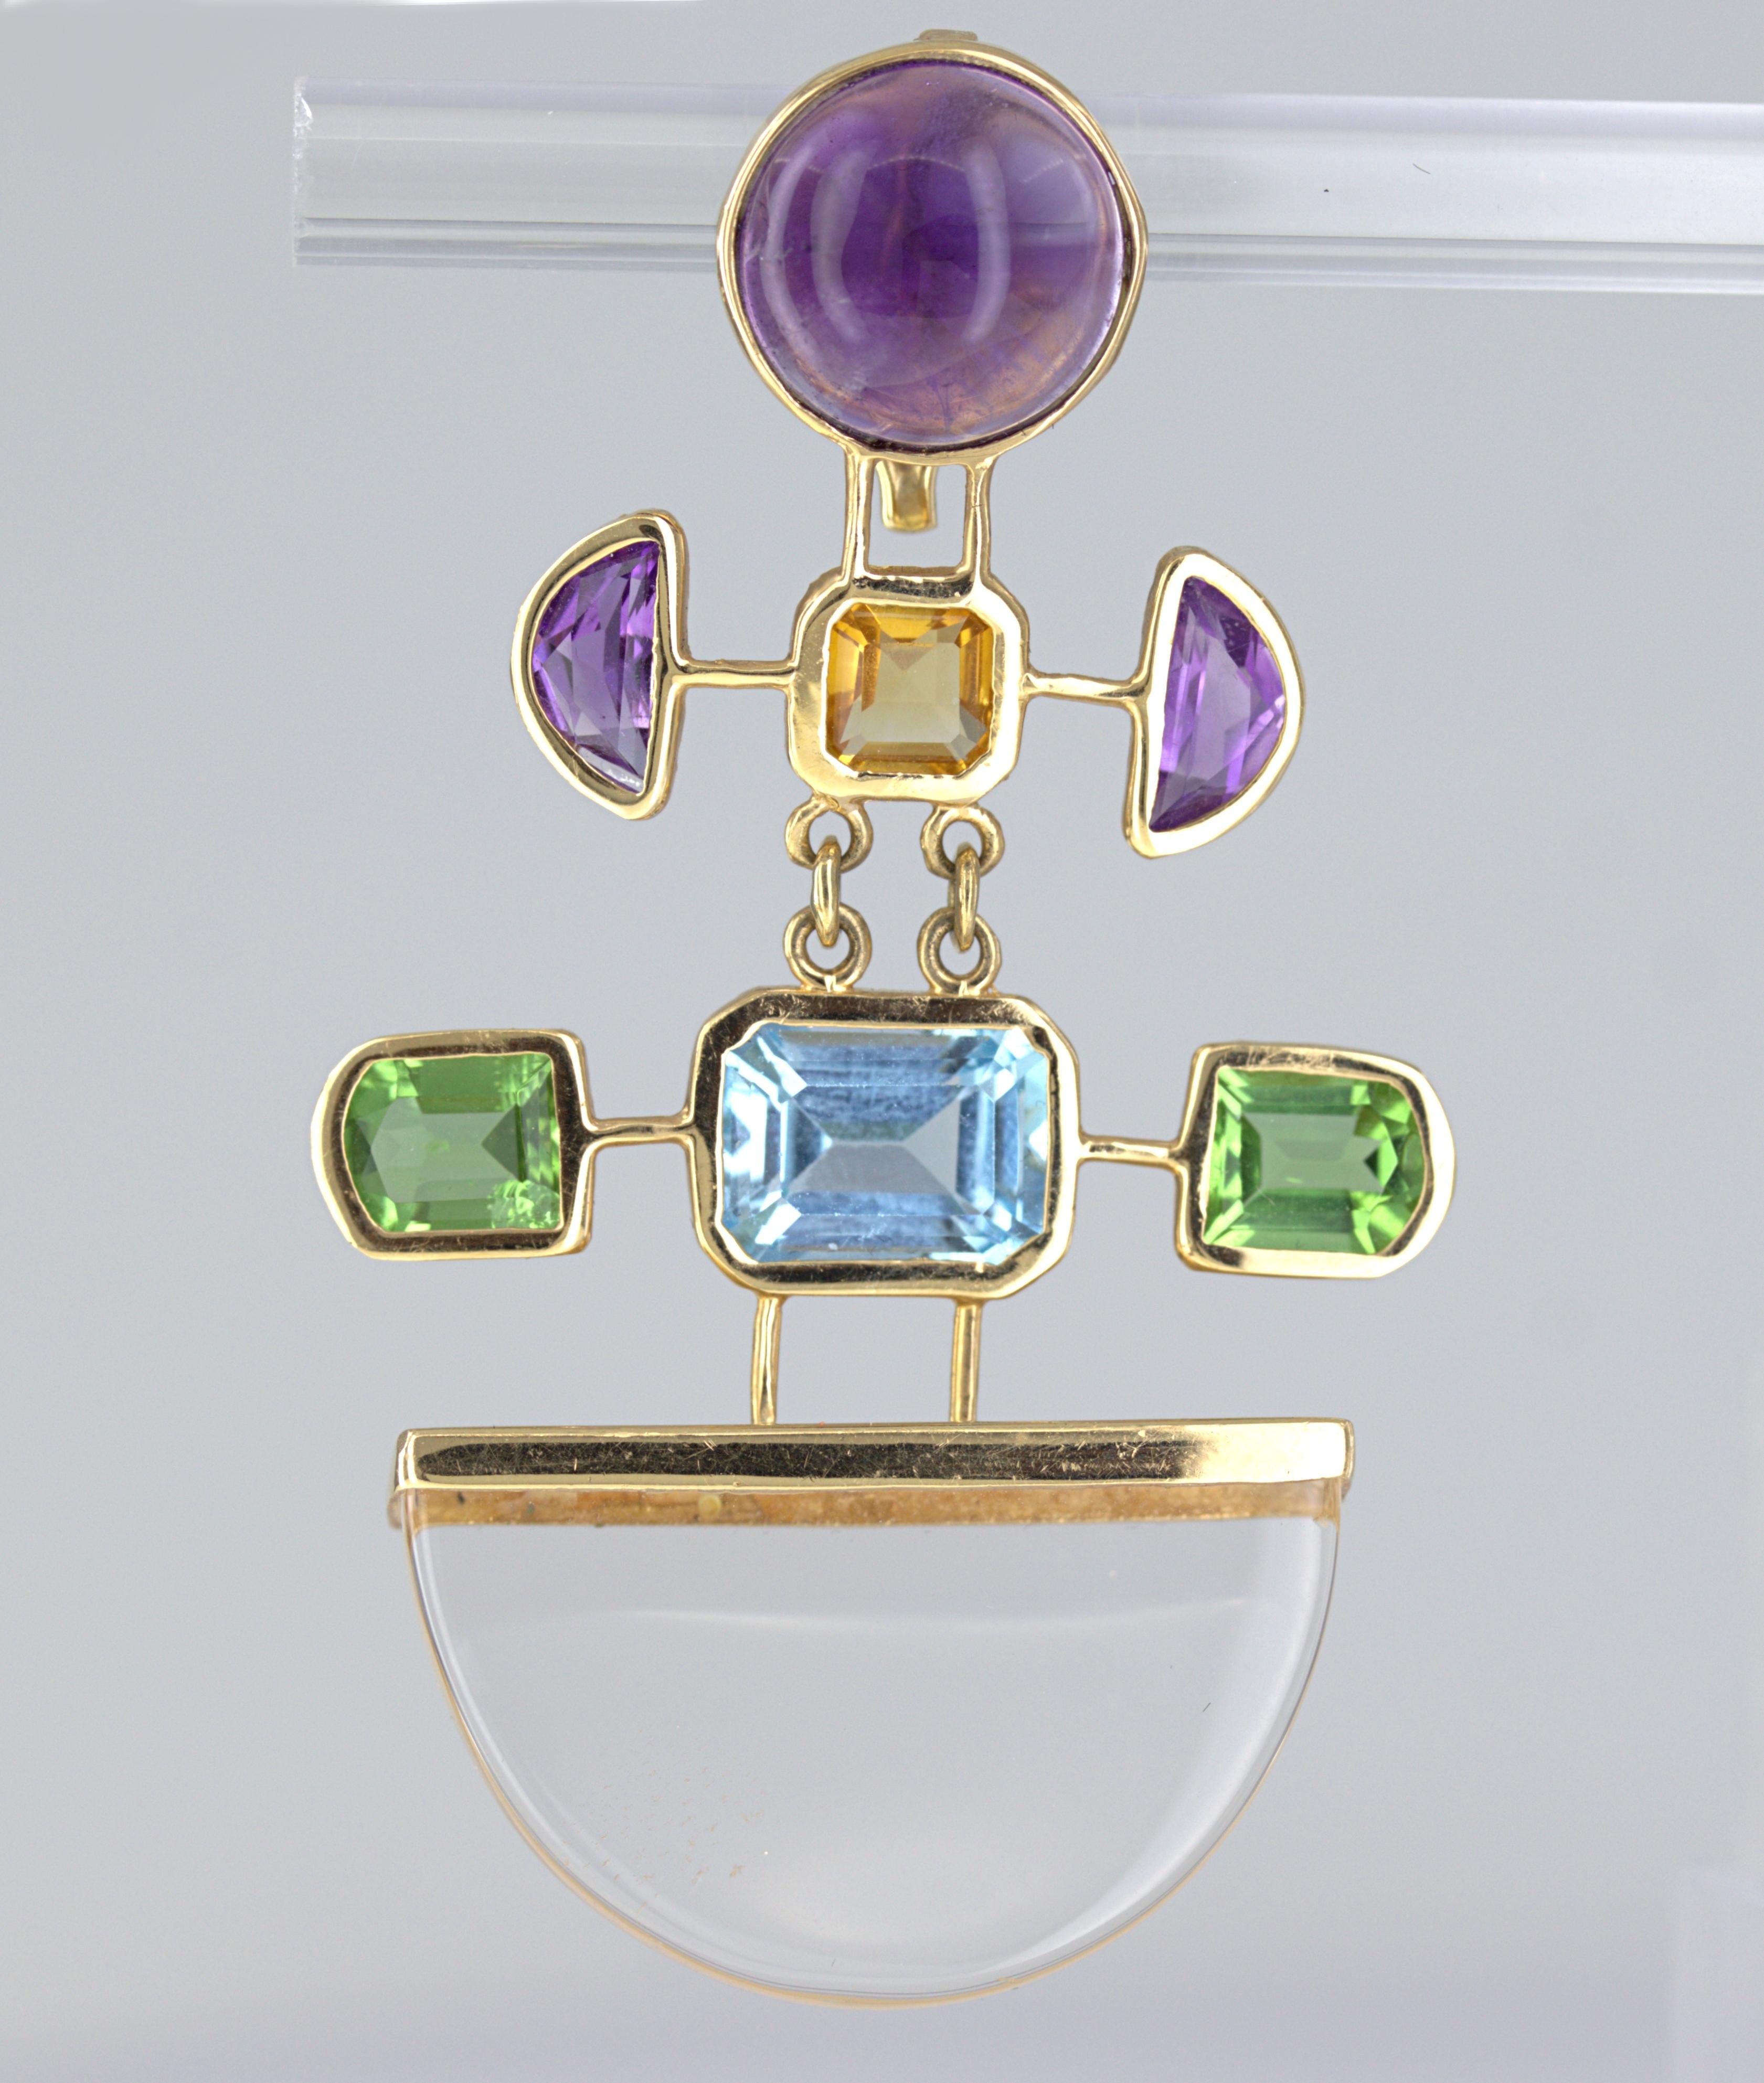 Featuring (1) carved rock crystal quartz wedge, (1) round amethyst cabochon, (1) emerald-cut blue topaz, (1) emerald-cut citrine, (2) amethyst half-moons, and (2) window-shaped peridots, all bezel set in an articulated, 14k yellow gold